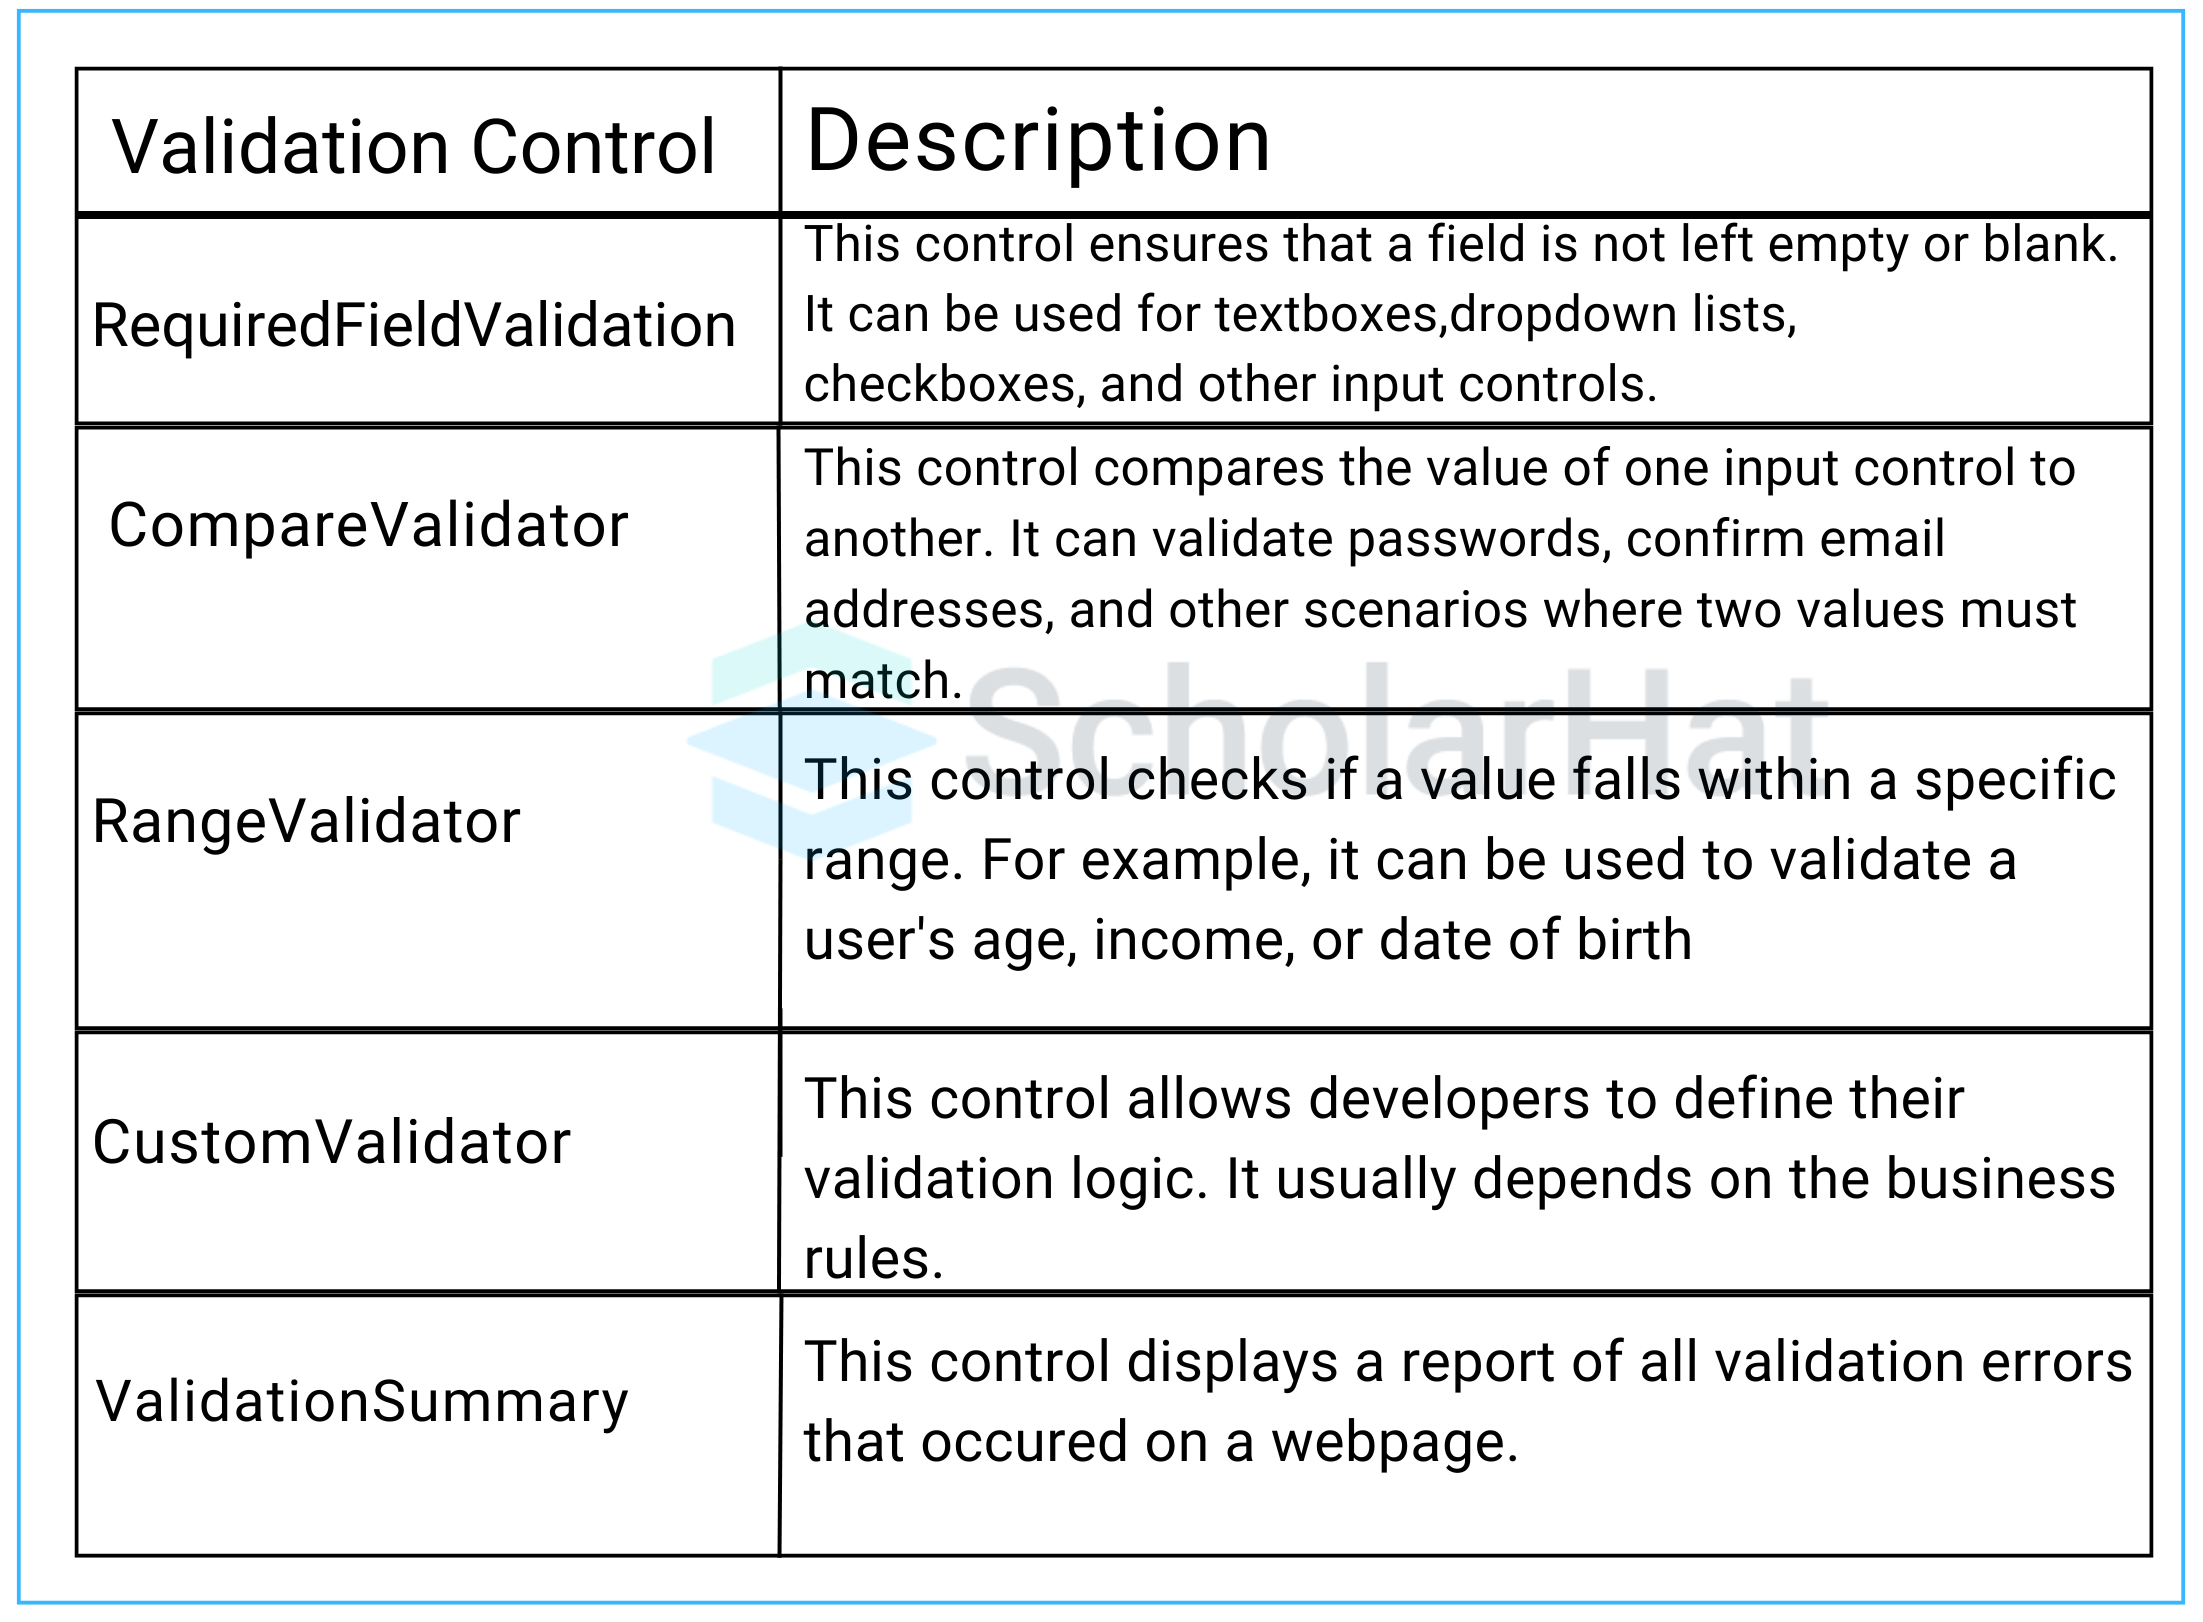 Validation Controls In a Nutshell